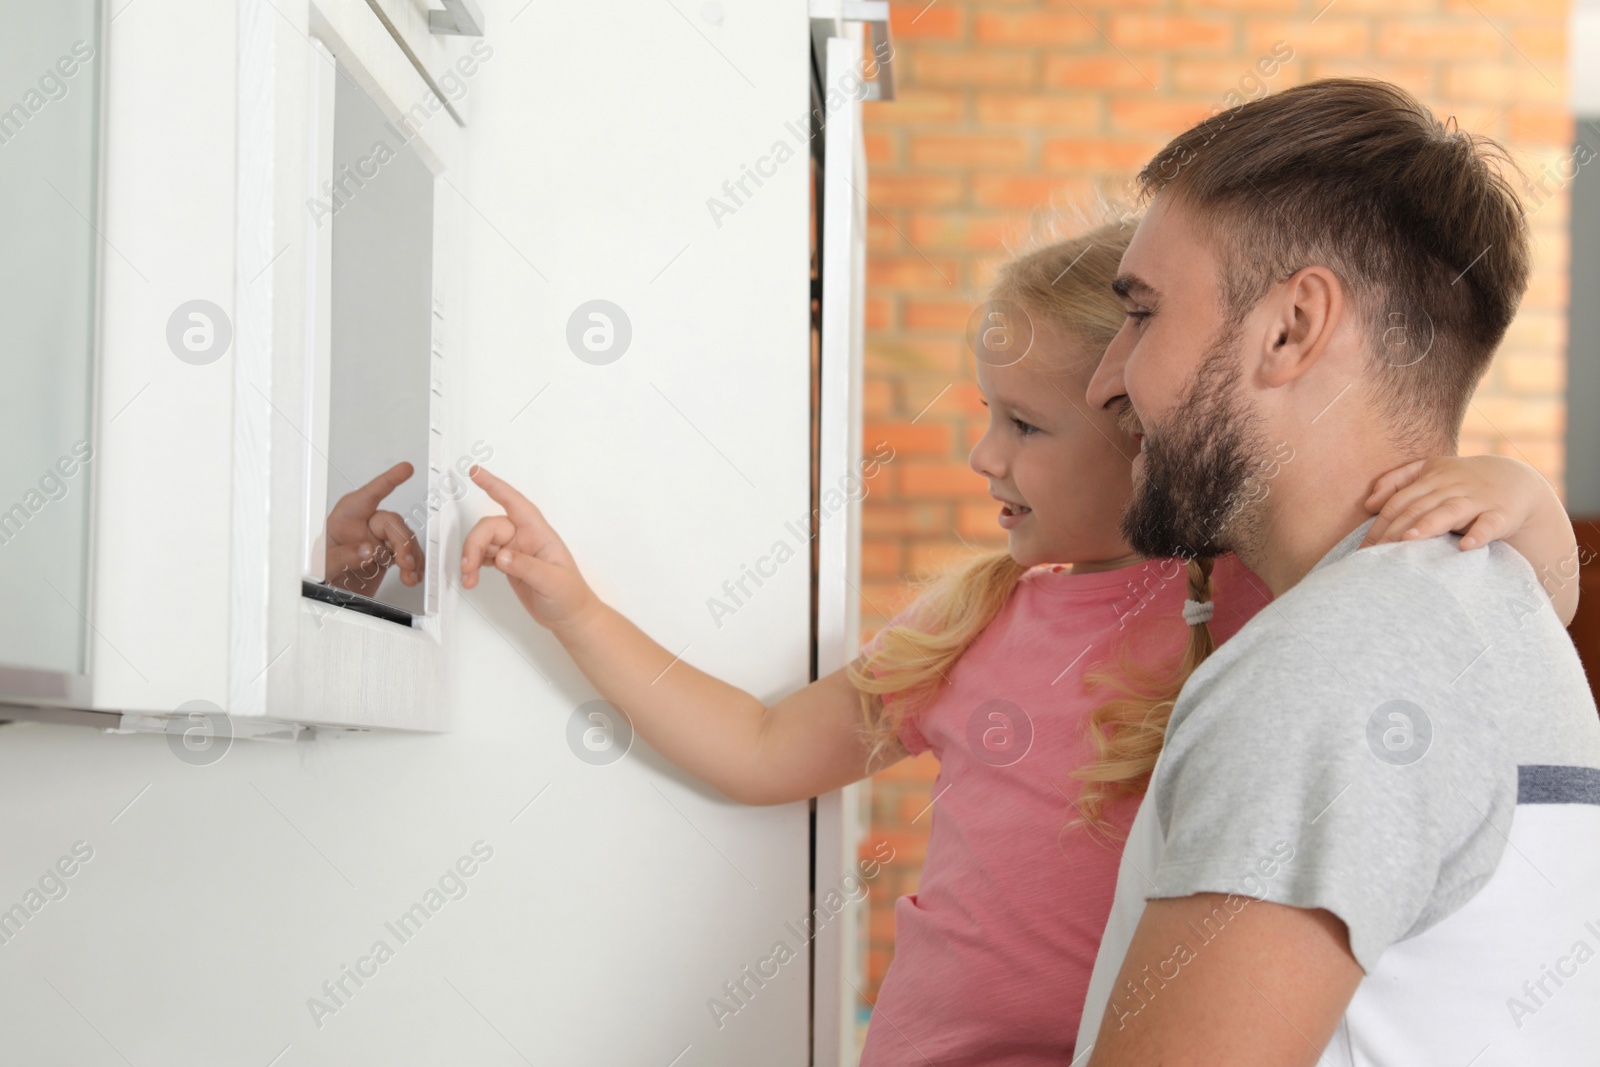 Photo of Little daughter and father using microwave oven in kitchen